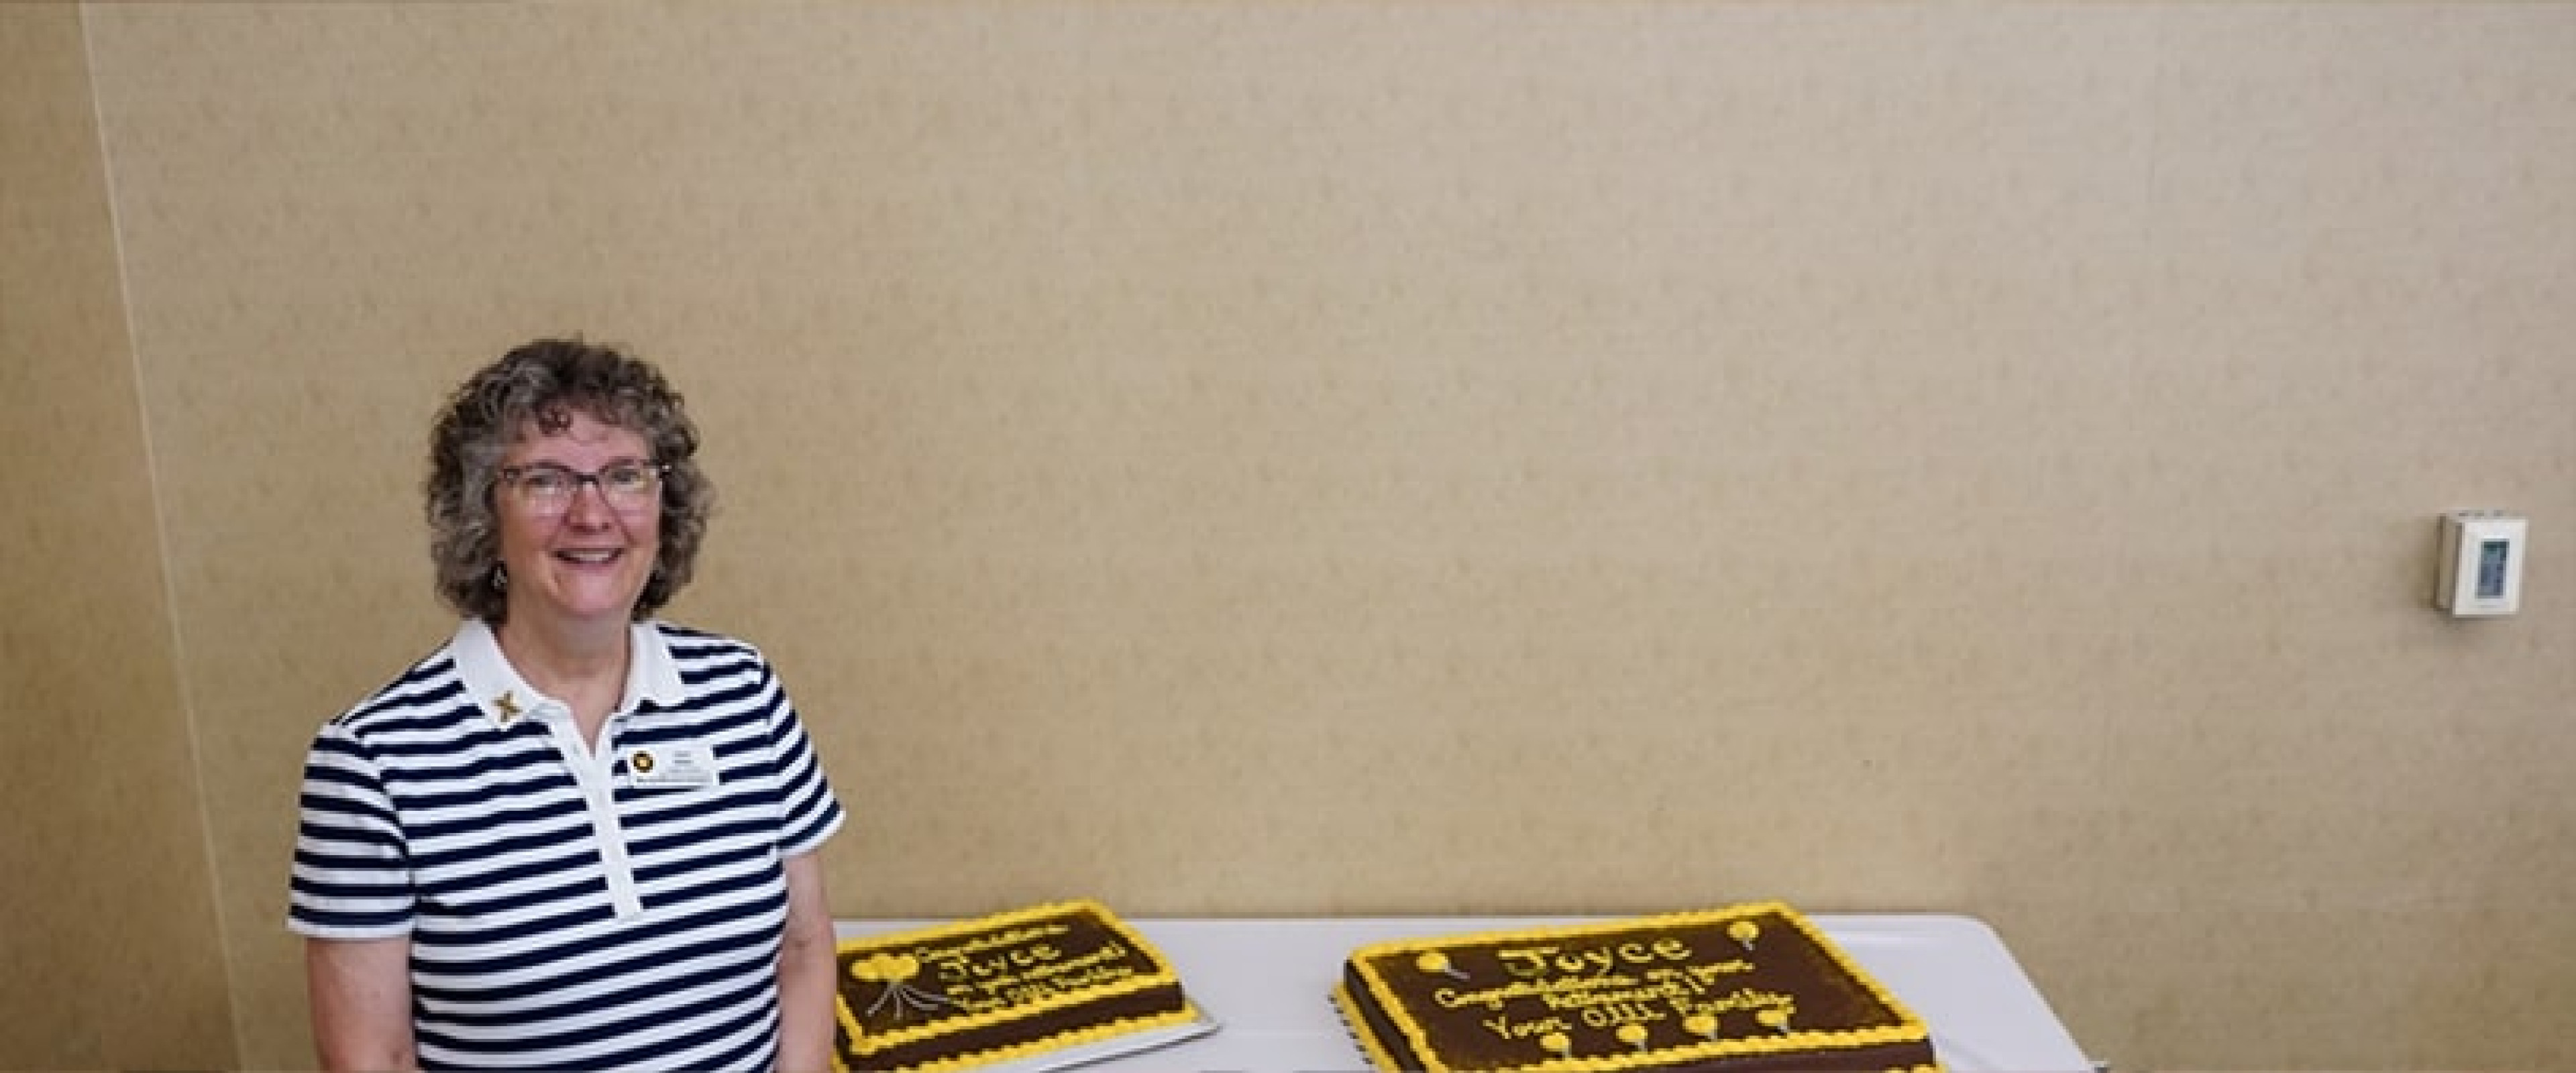 An OLLI staff member posing next to the reception cakes.